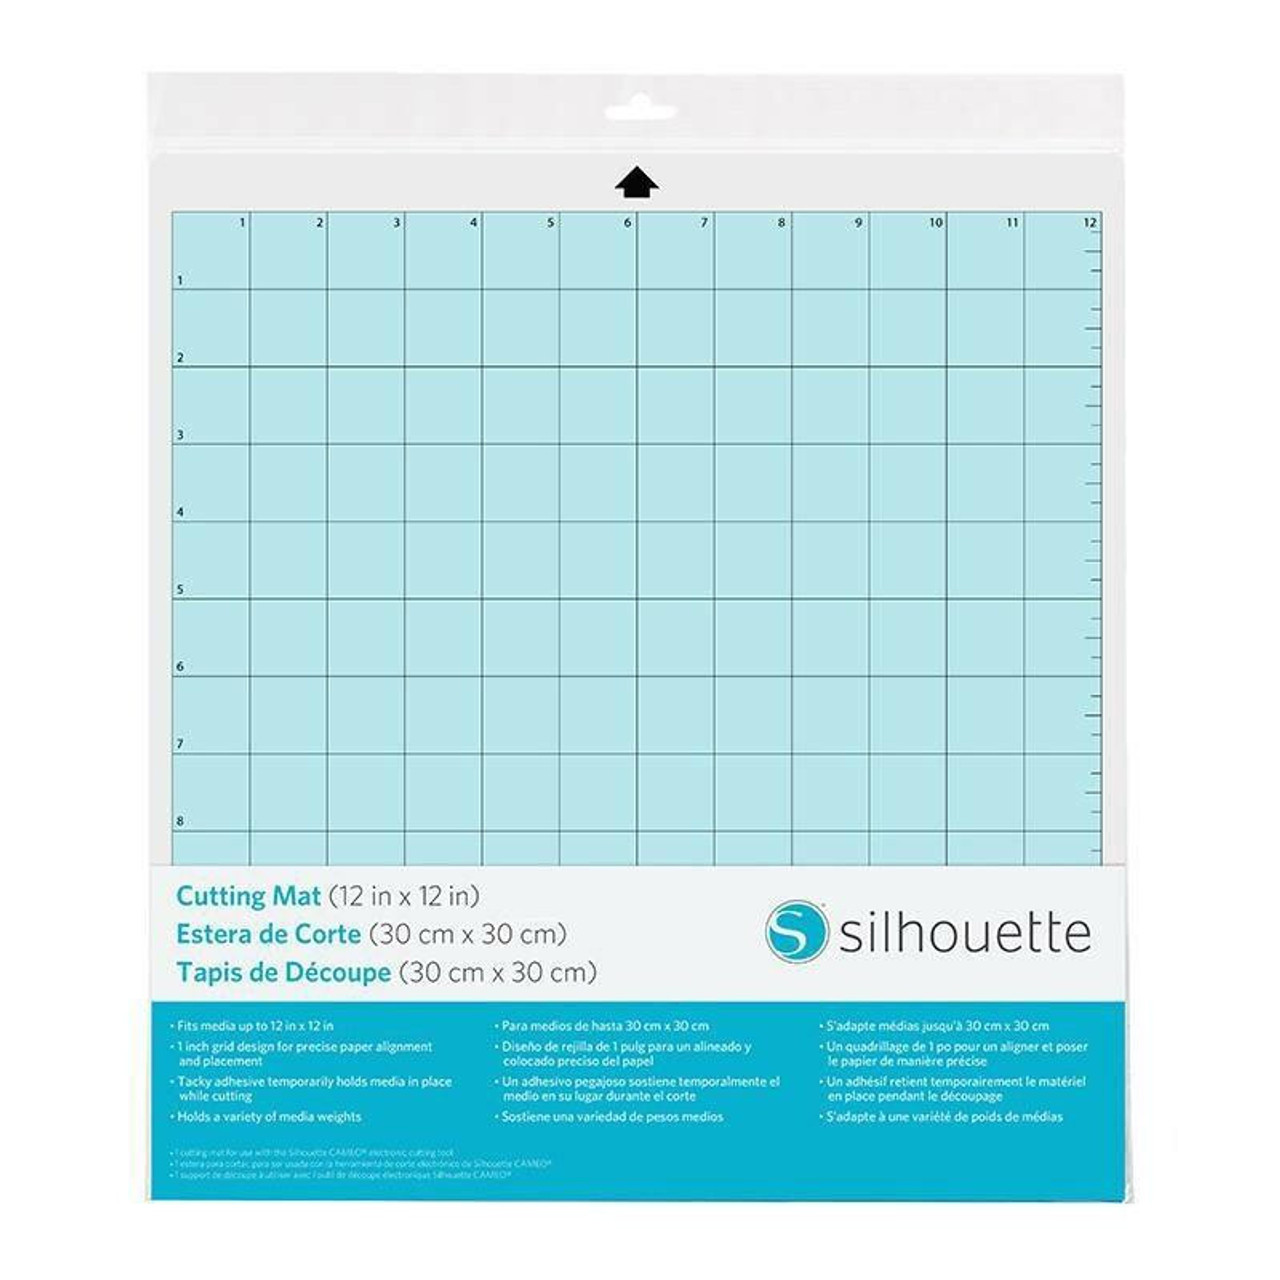 Silhouette Cameo 4 Pro - GM Crafts